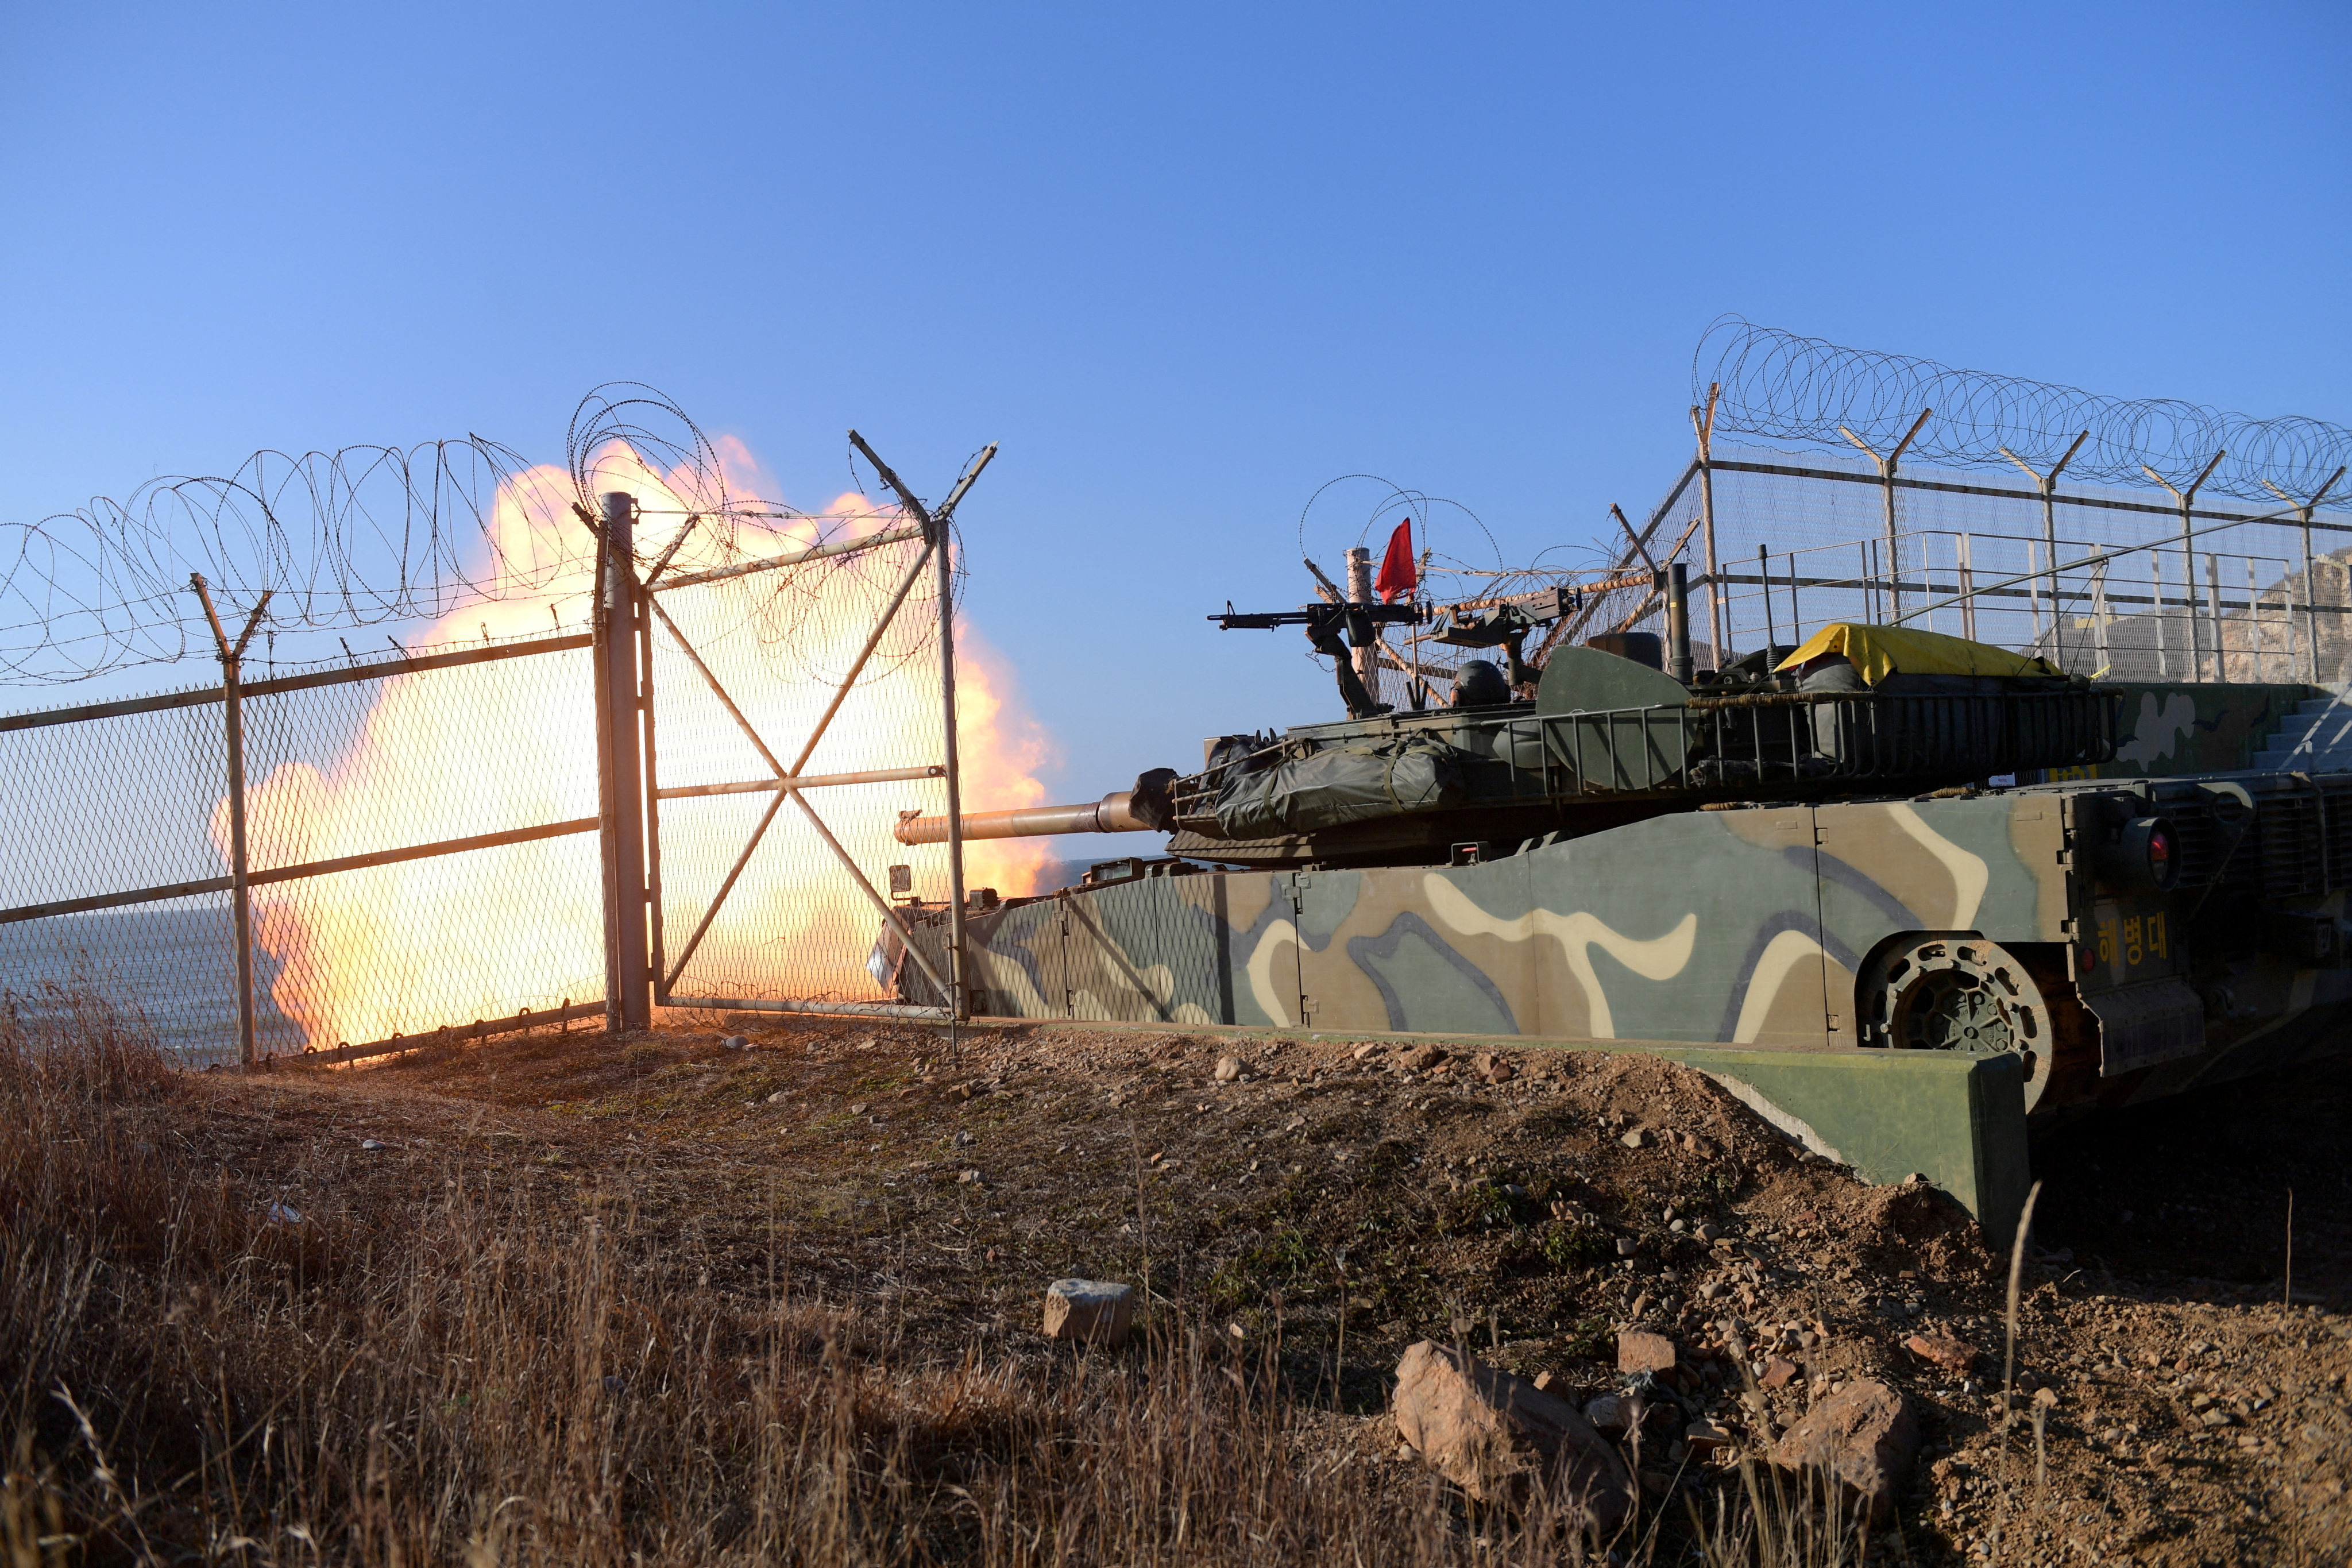 A South Korean tank fires during a military drill on Yeonpyeong Island earlier this month. Photo: South Korean Defence Ministry/Handout via Reuters